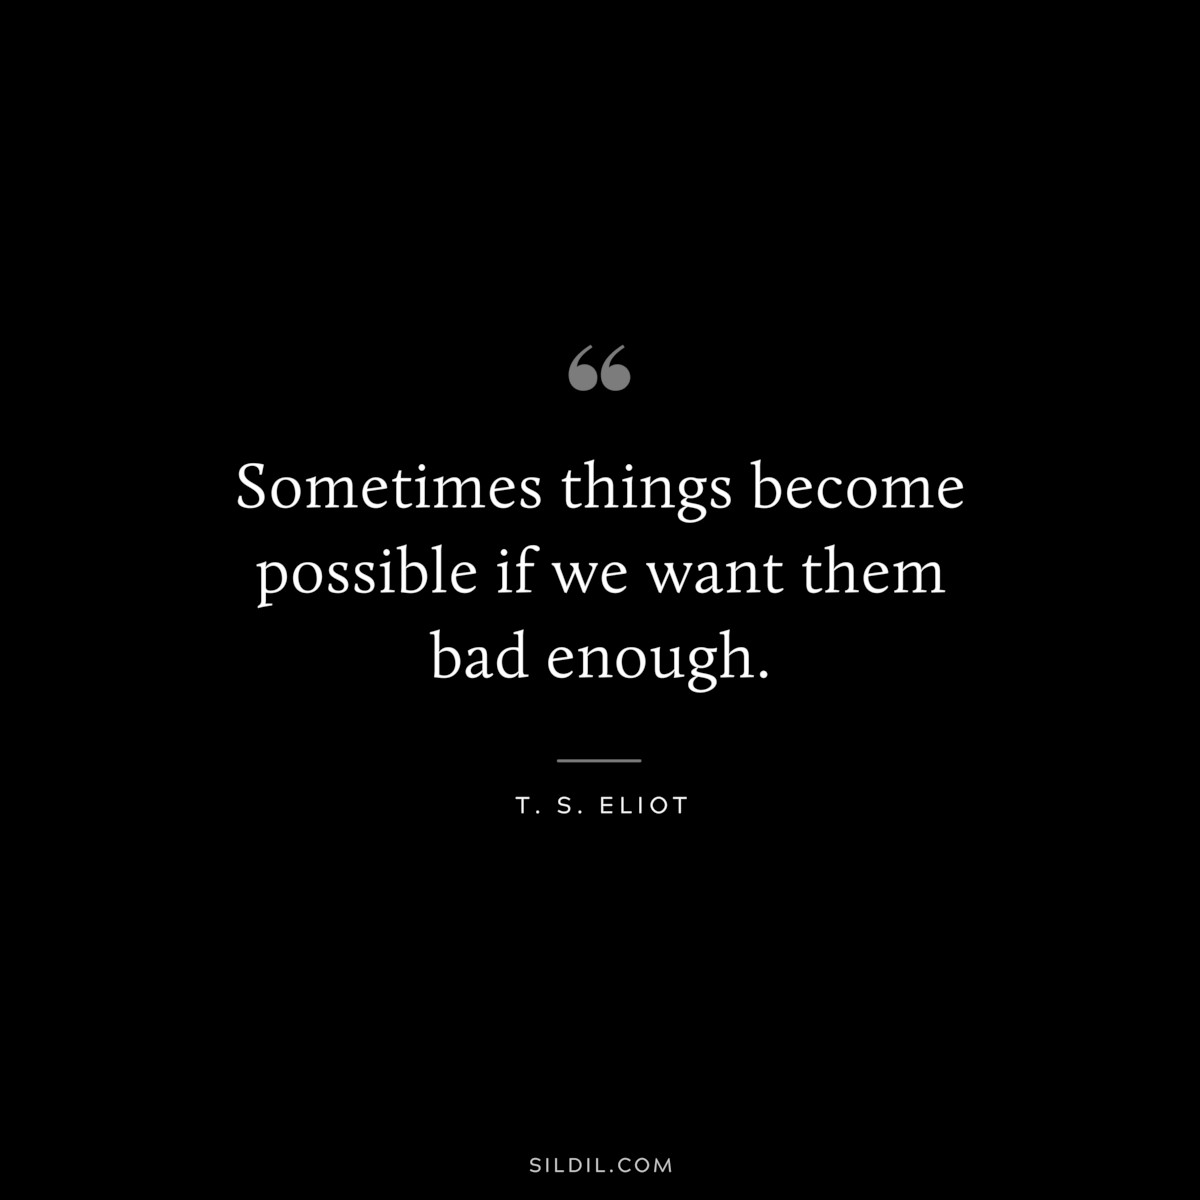 Sometimes things become possible if we want them bad enough. ― T. S. Eliot